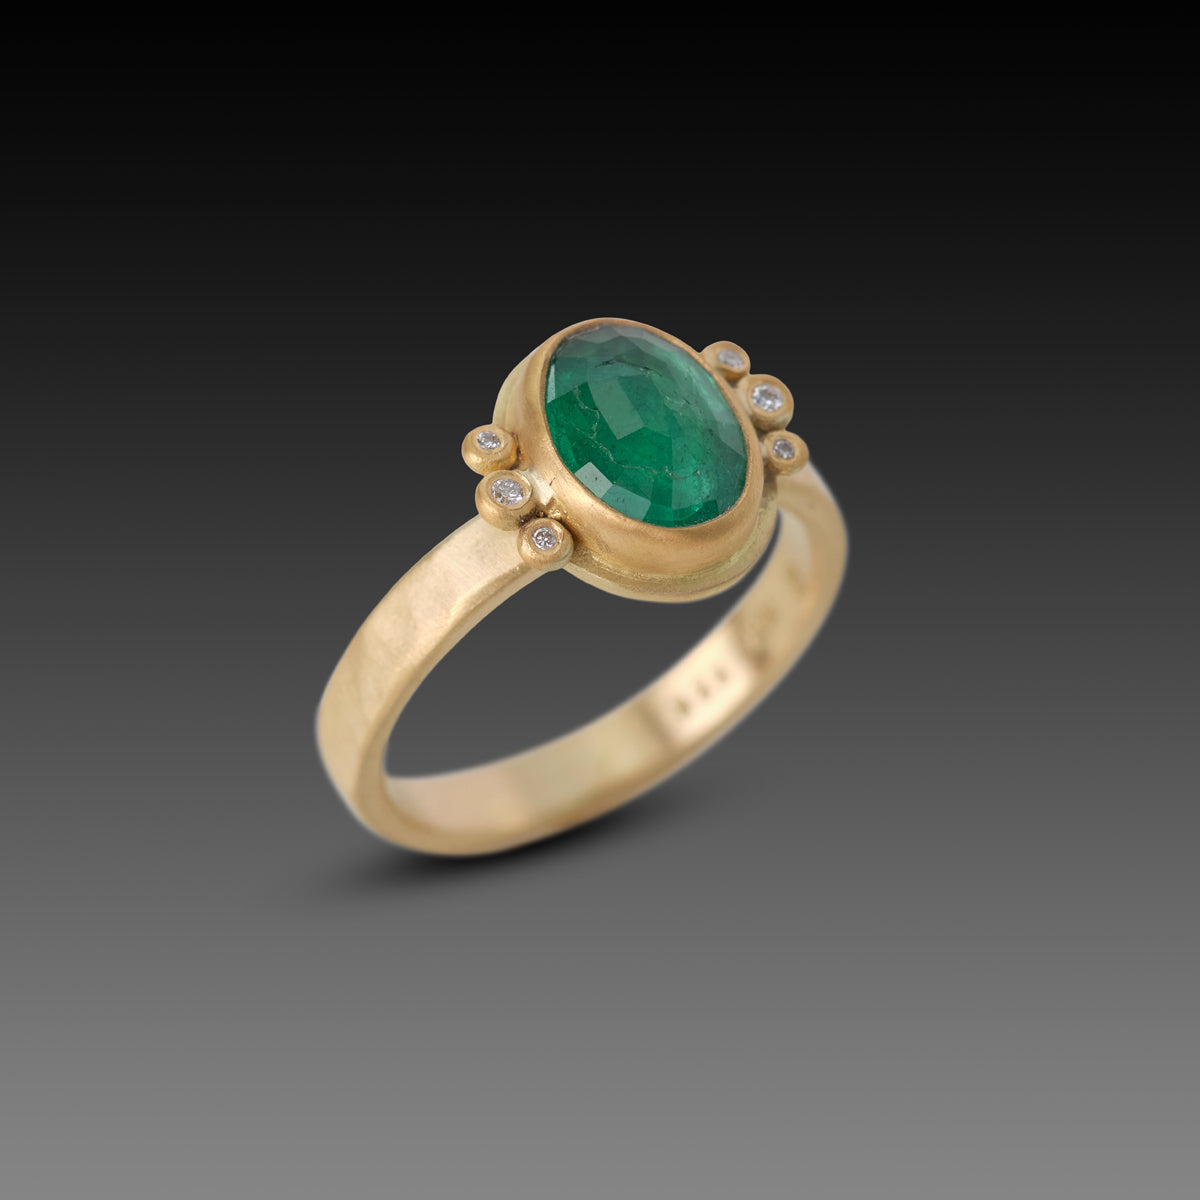 Buy Lab Created Emerald Ring, Oval Cut Emerald Ring, 925 Sterling Silver  Ring, Green Gemstone Ring, Emerald Engagement Ring, Hand Made Ring Online  in India - Etsy